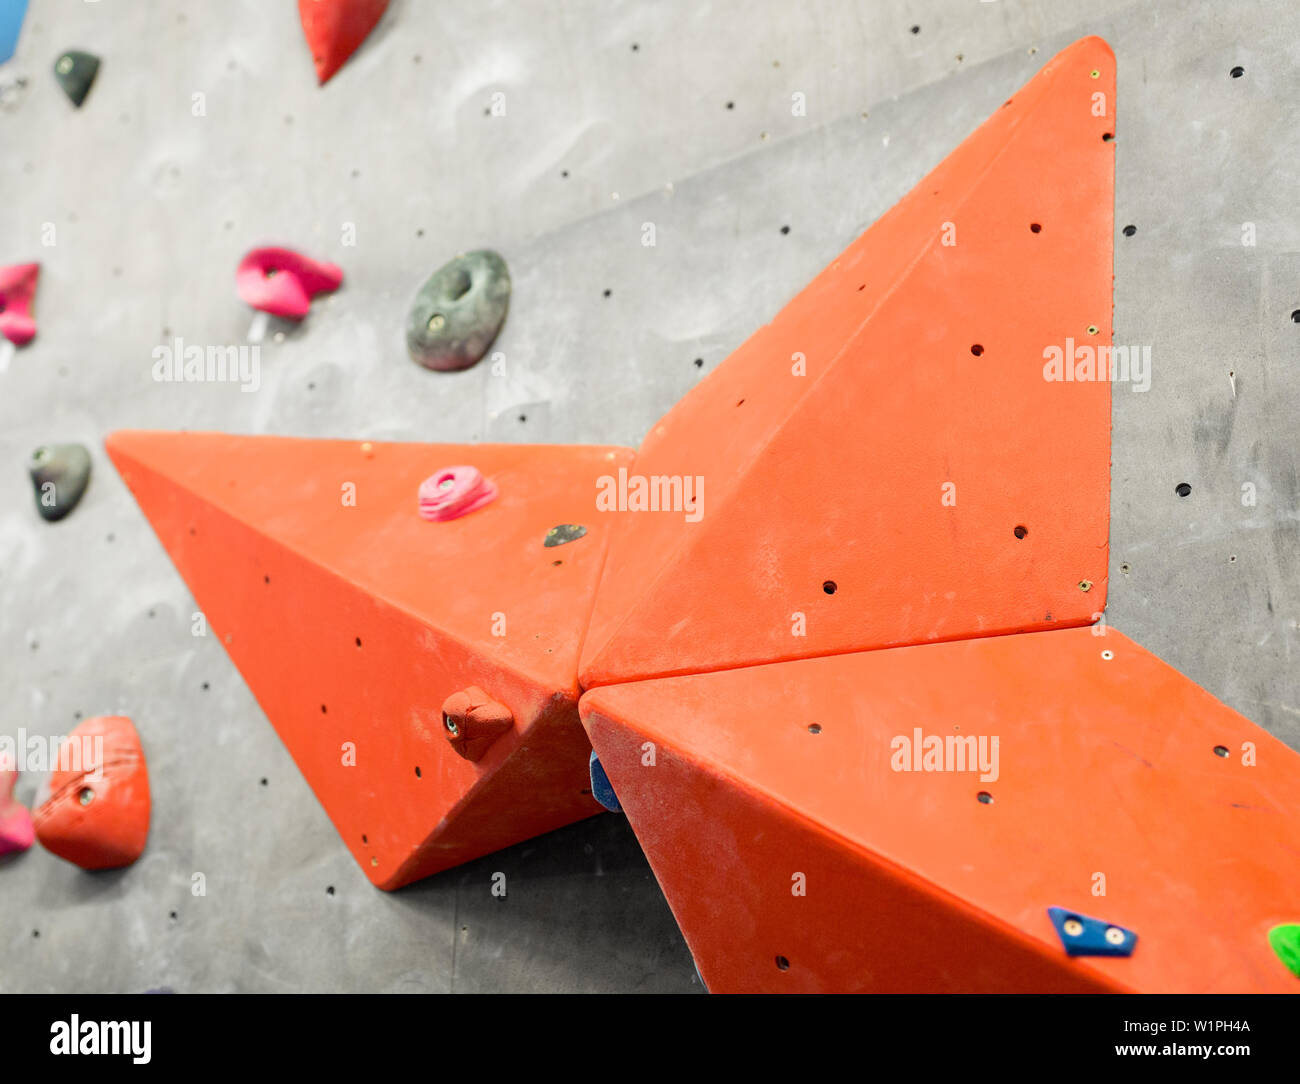 exercise wall at indoor climbing gym Stock Photo